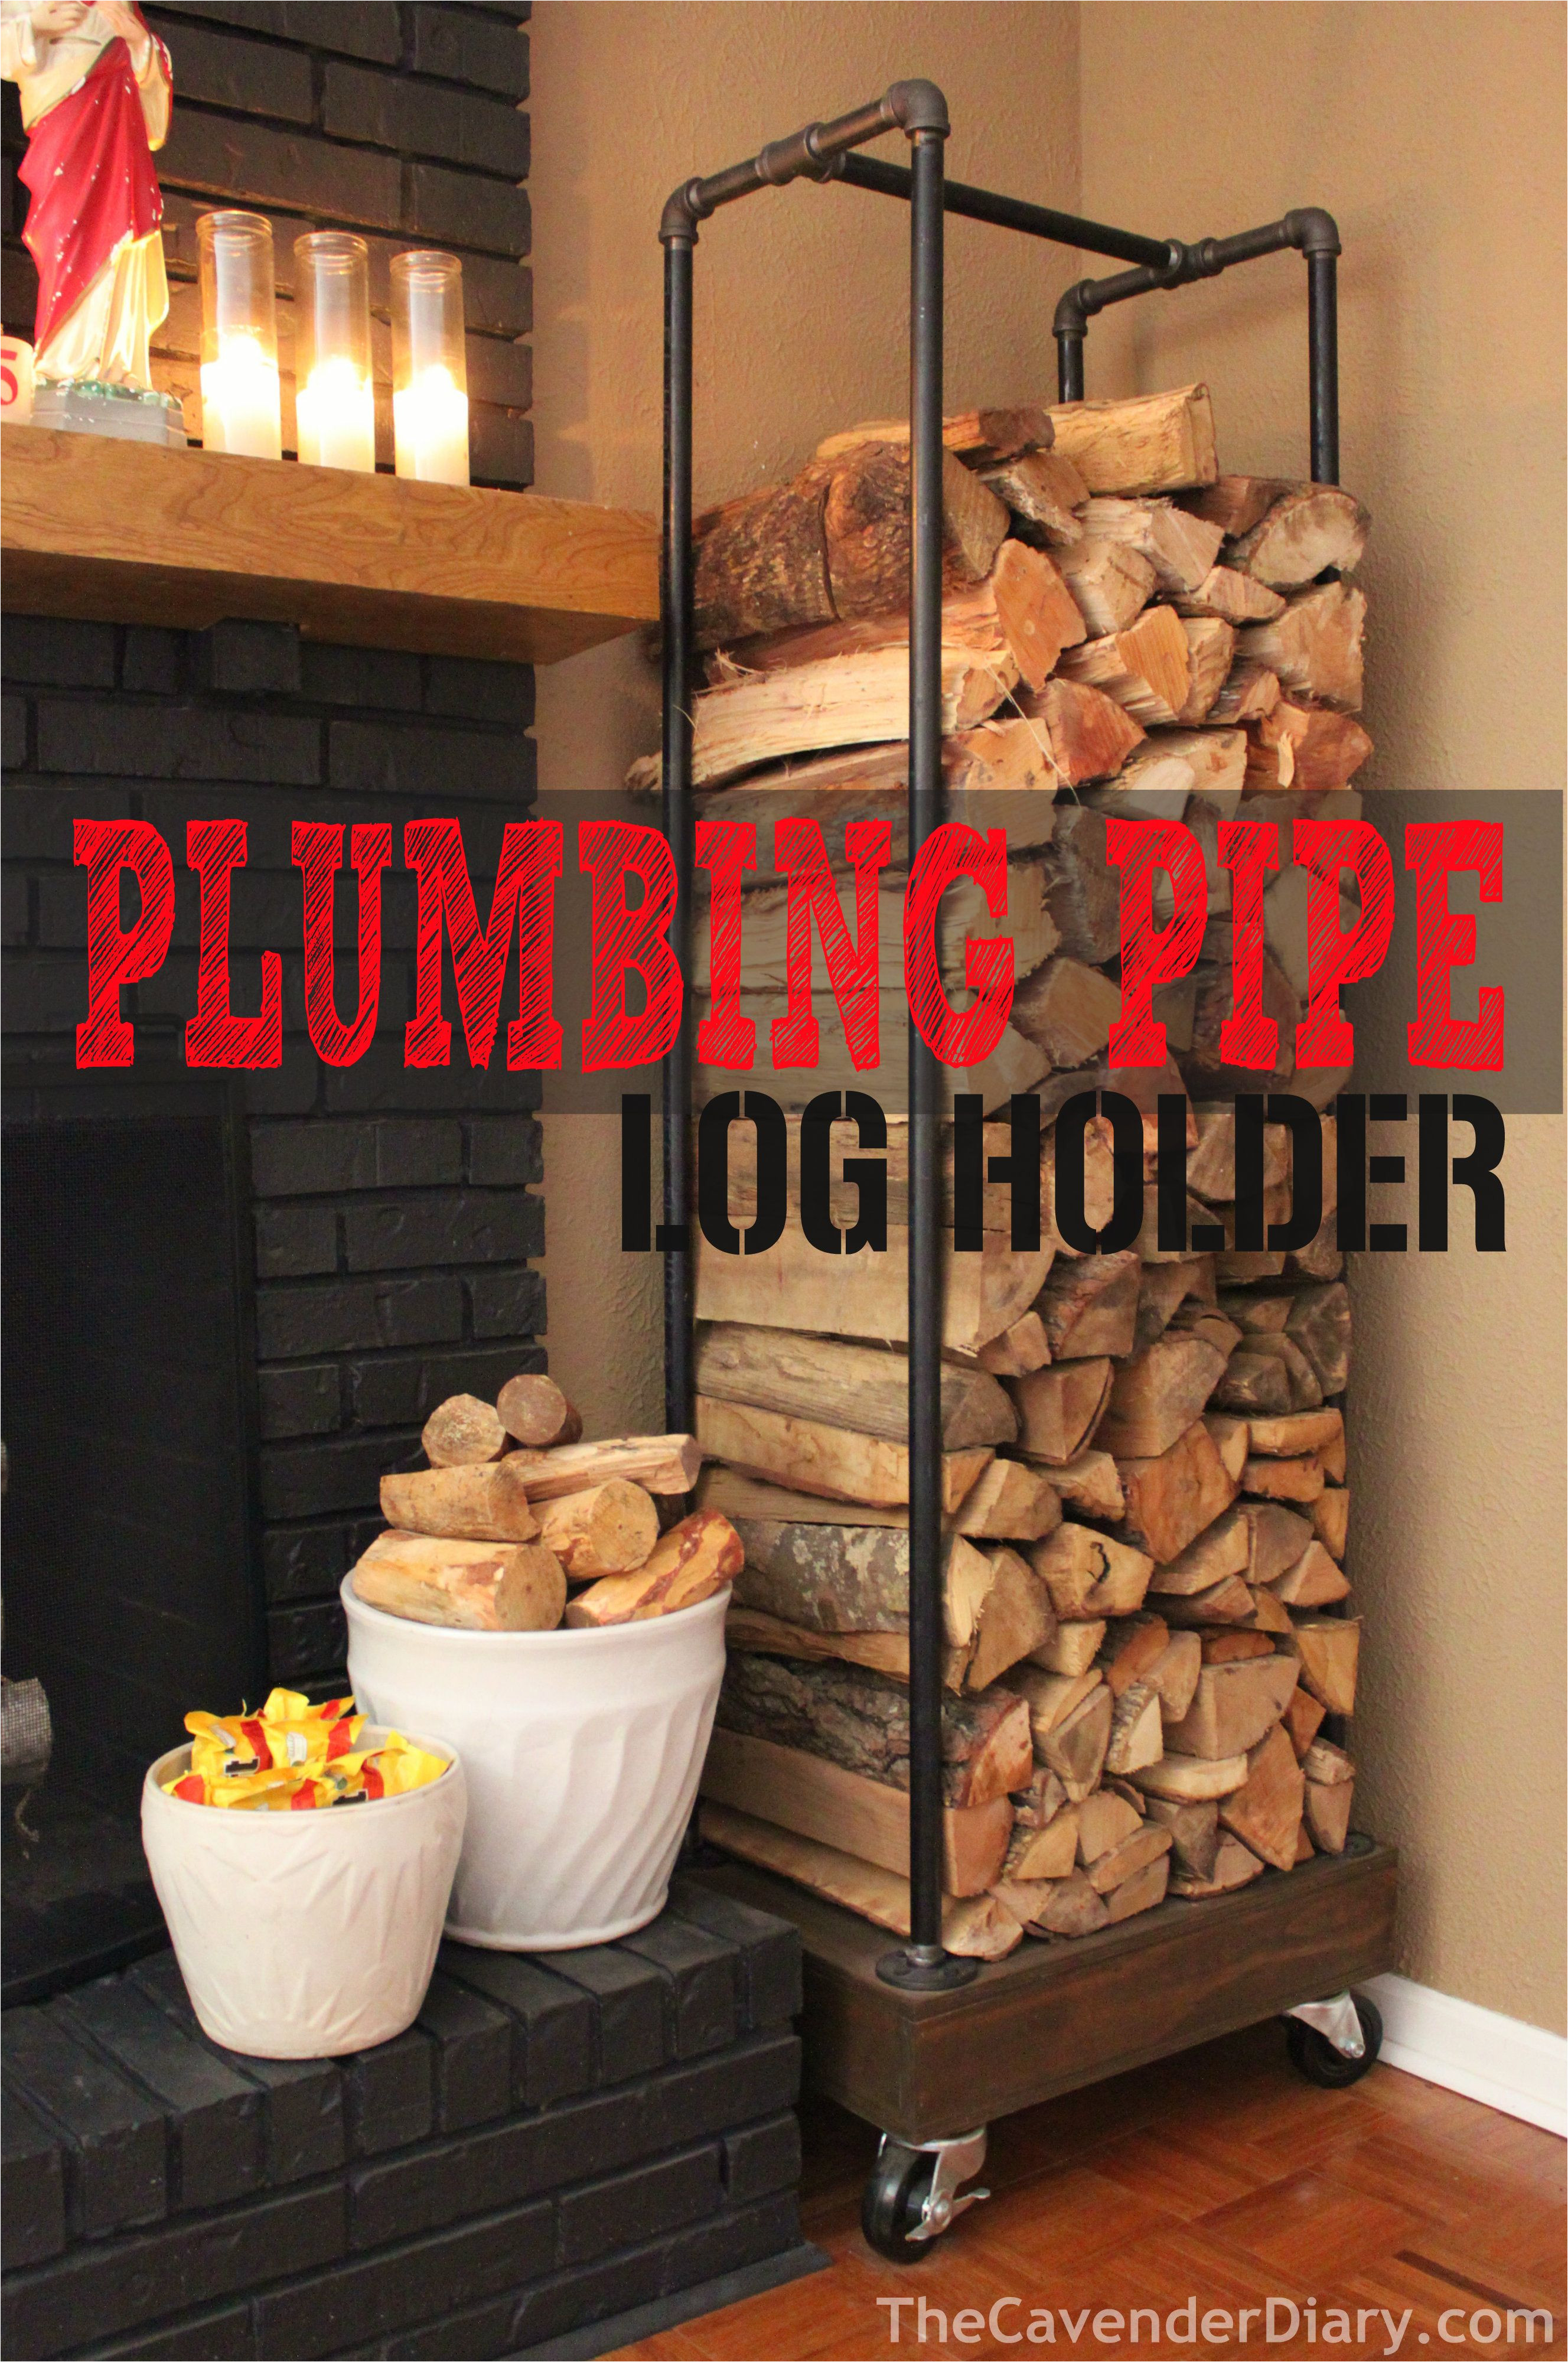 diy rolling log holder made from plumbing pipes thecavenderdiary com